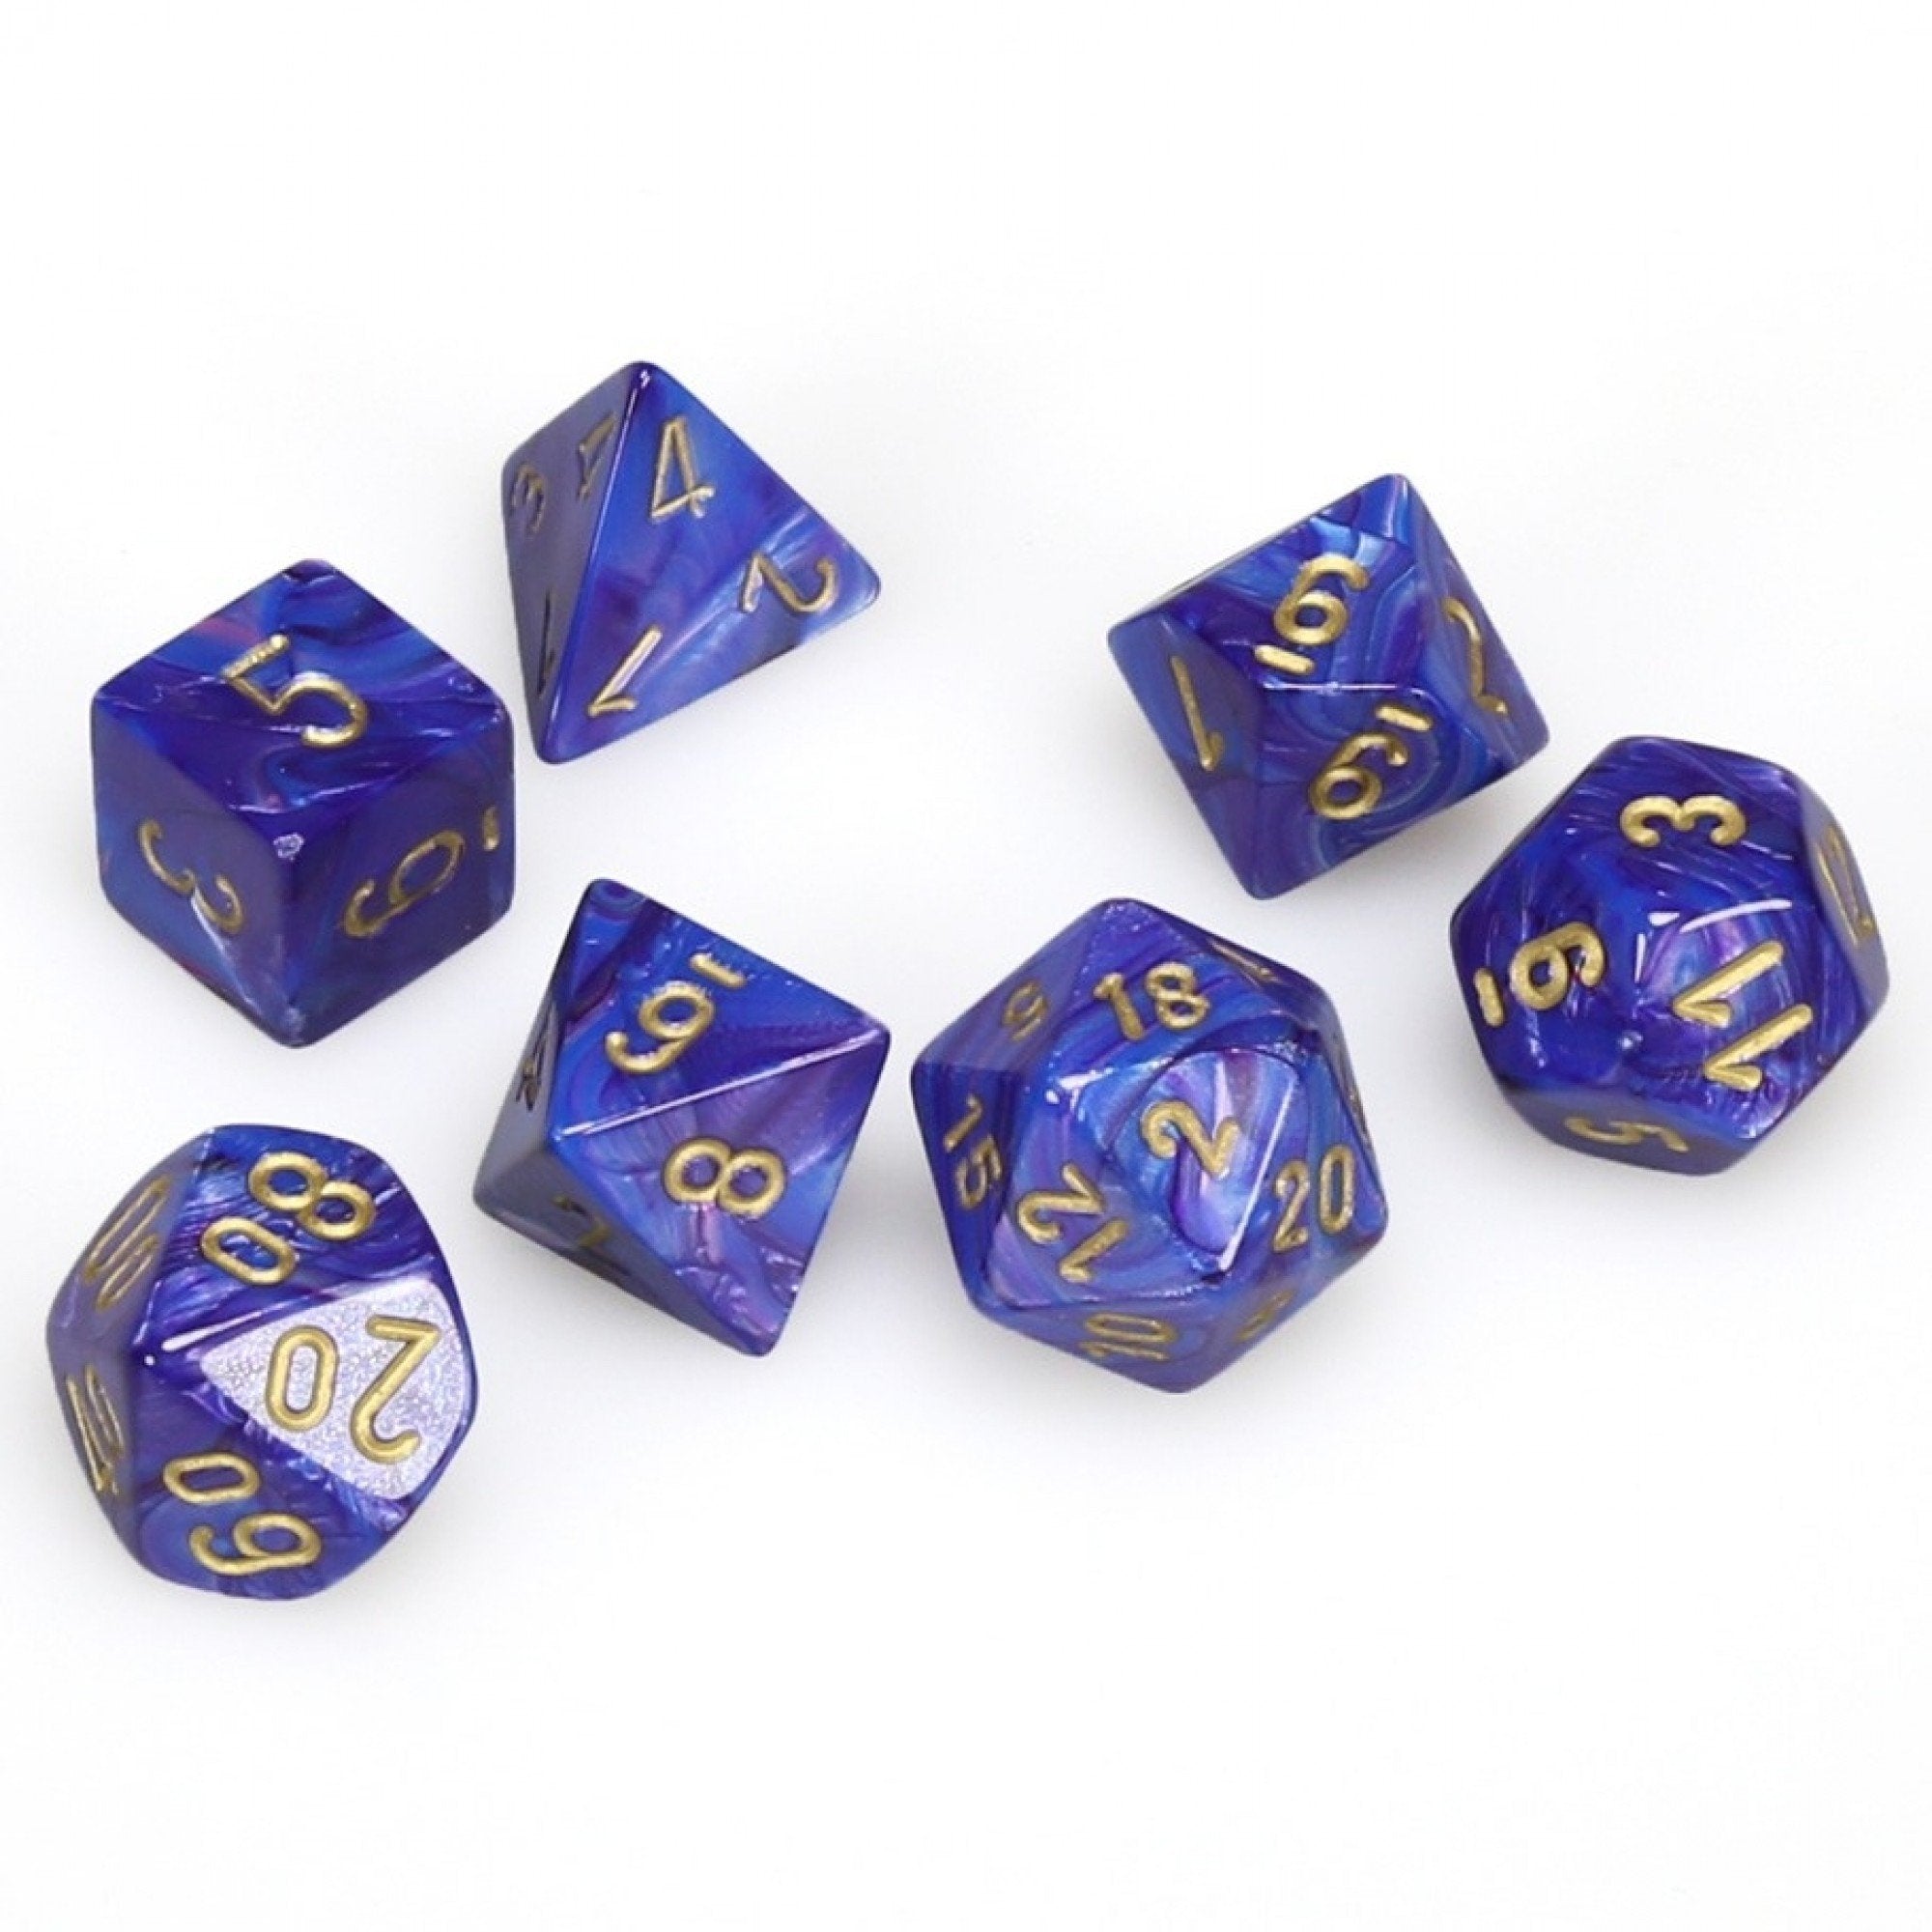 Chessex Lustrous™ Polyhedral 7pcs Dice (Purple/Gold) [CHX27497]-Chessex-Ace Cards & Collectibles